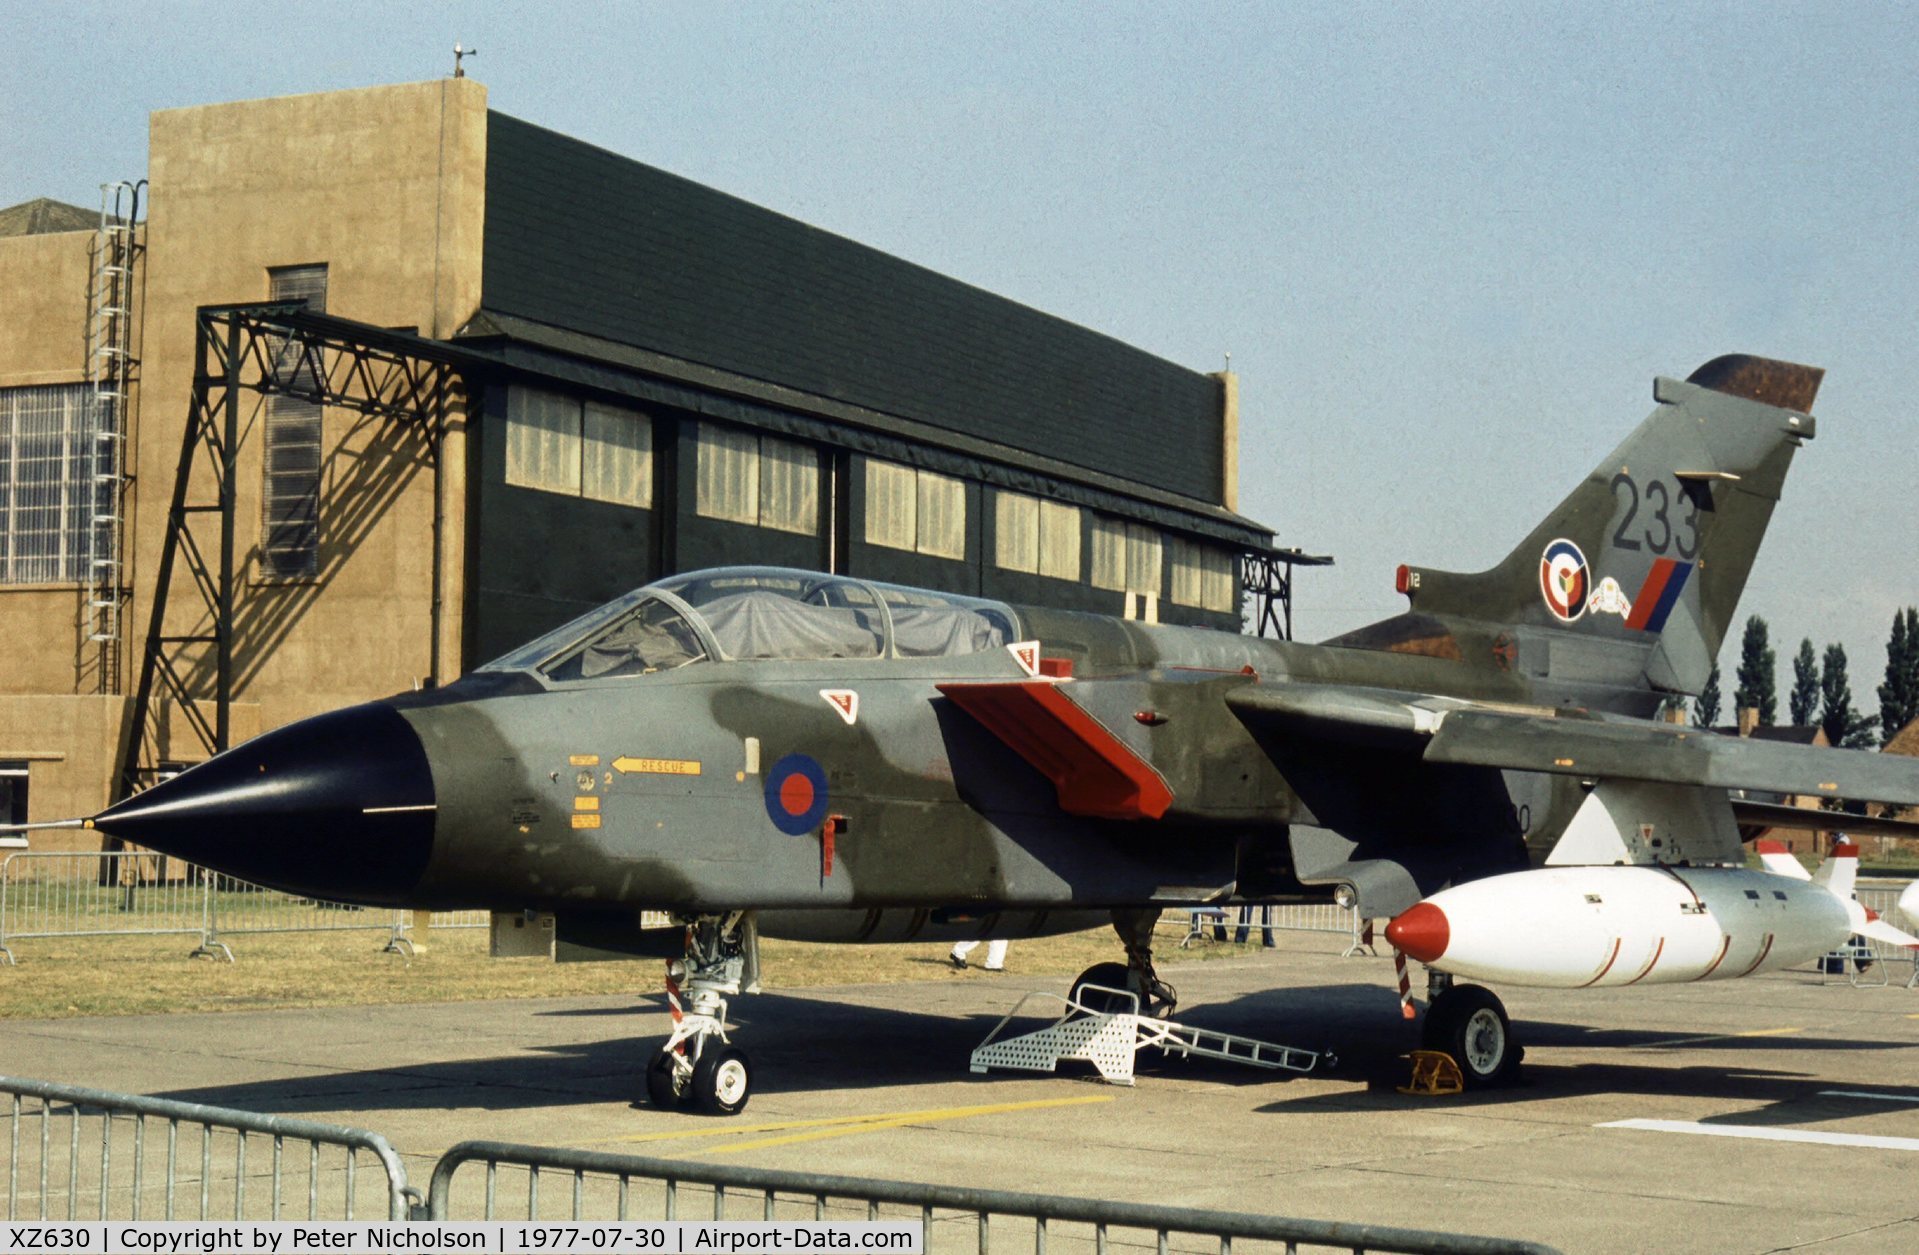 XZ630, 1977 Panavia Tornado GR.1 C/N P.12, Tornado prototype P.12 on display at the 1977 Royal Review at RAF Finningley and still wearing the Paris Air Show number 233 from earlier in the year.